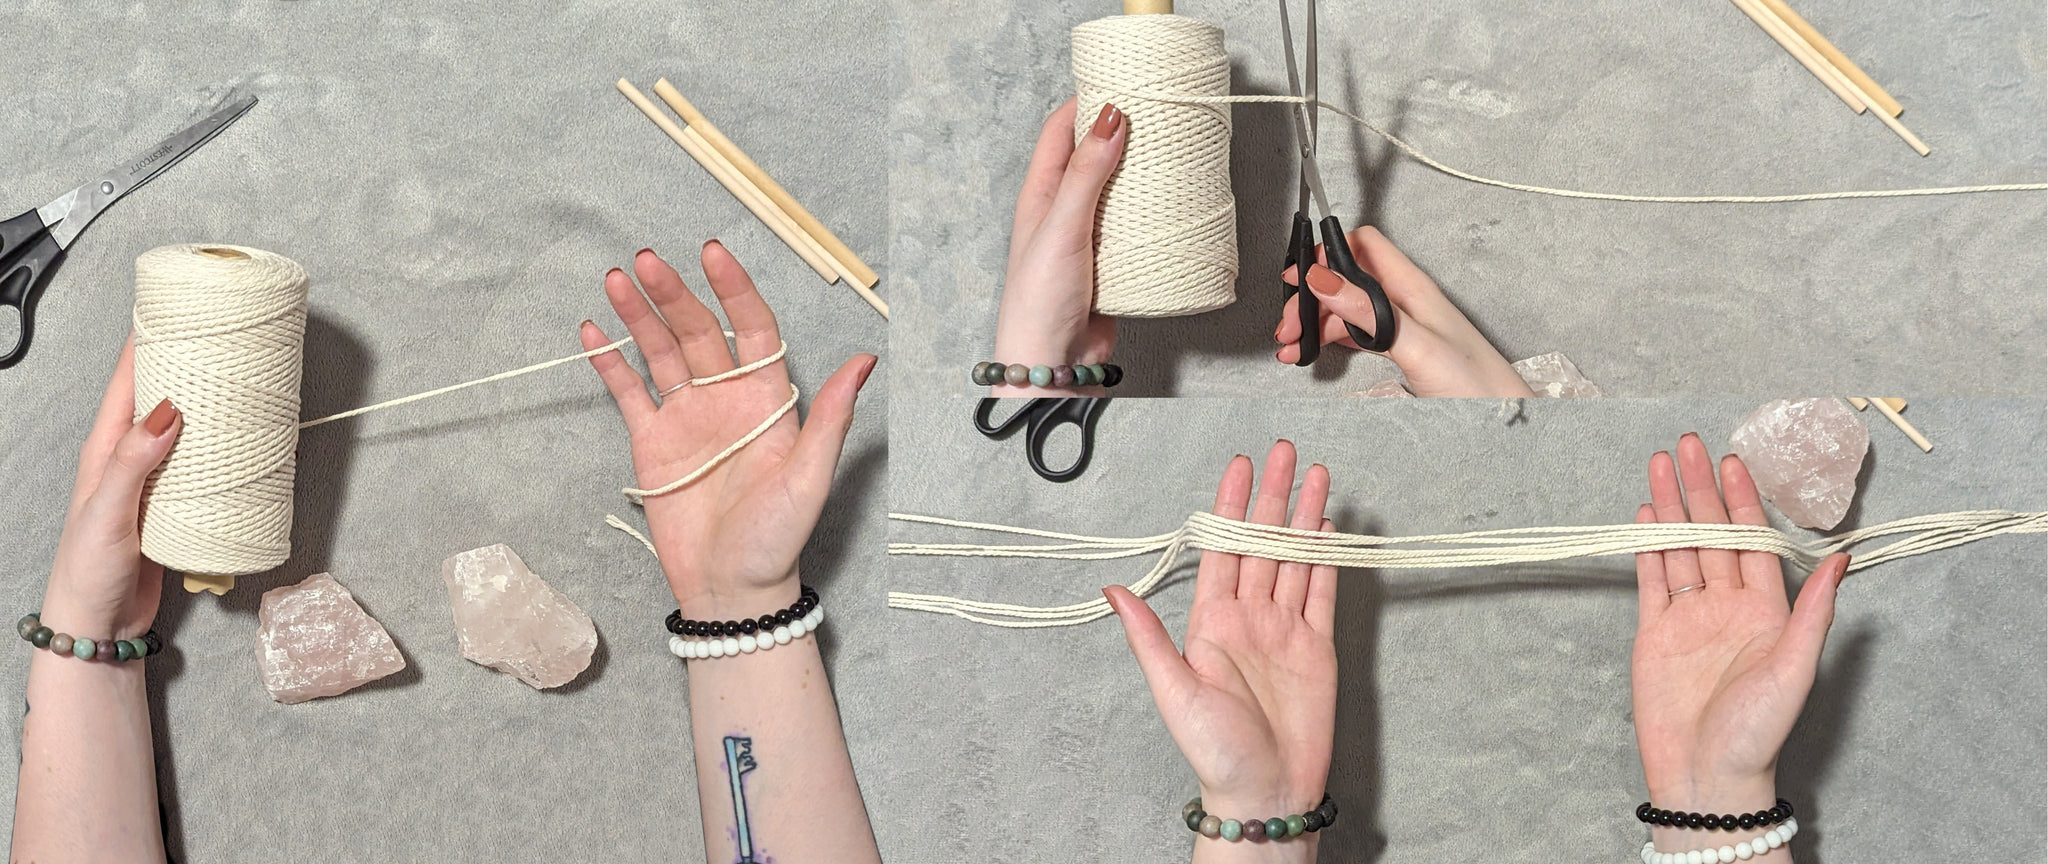 Measuring and cutting macrame cord